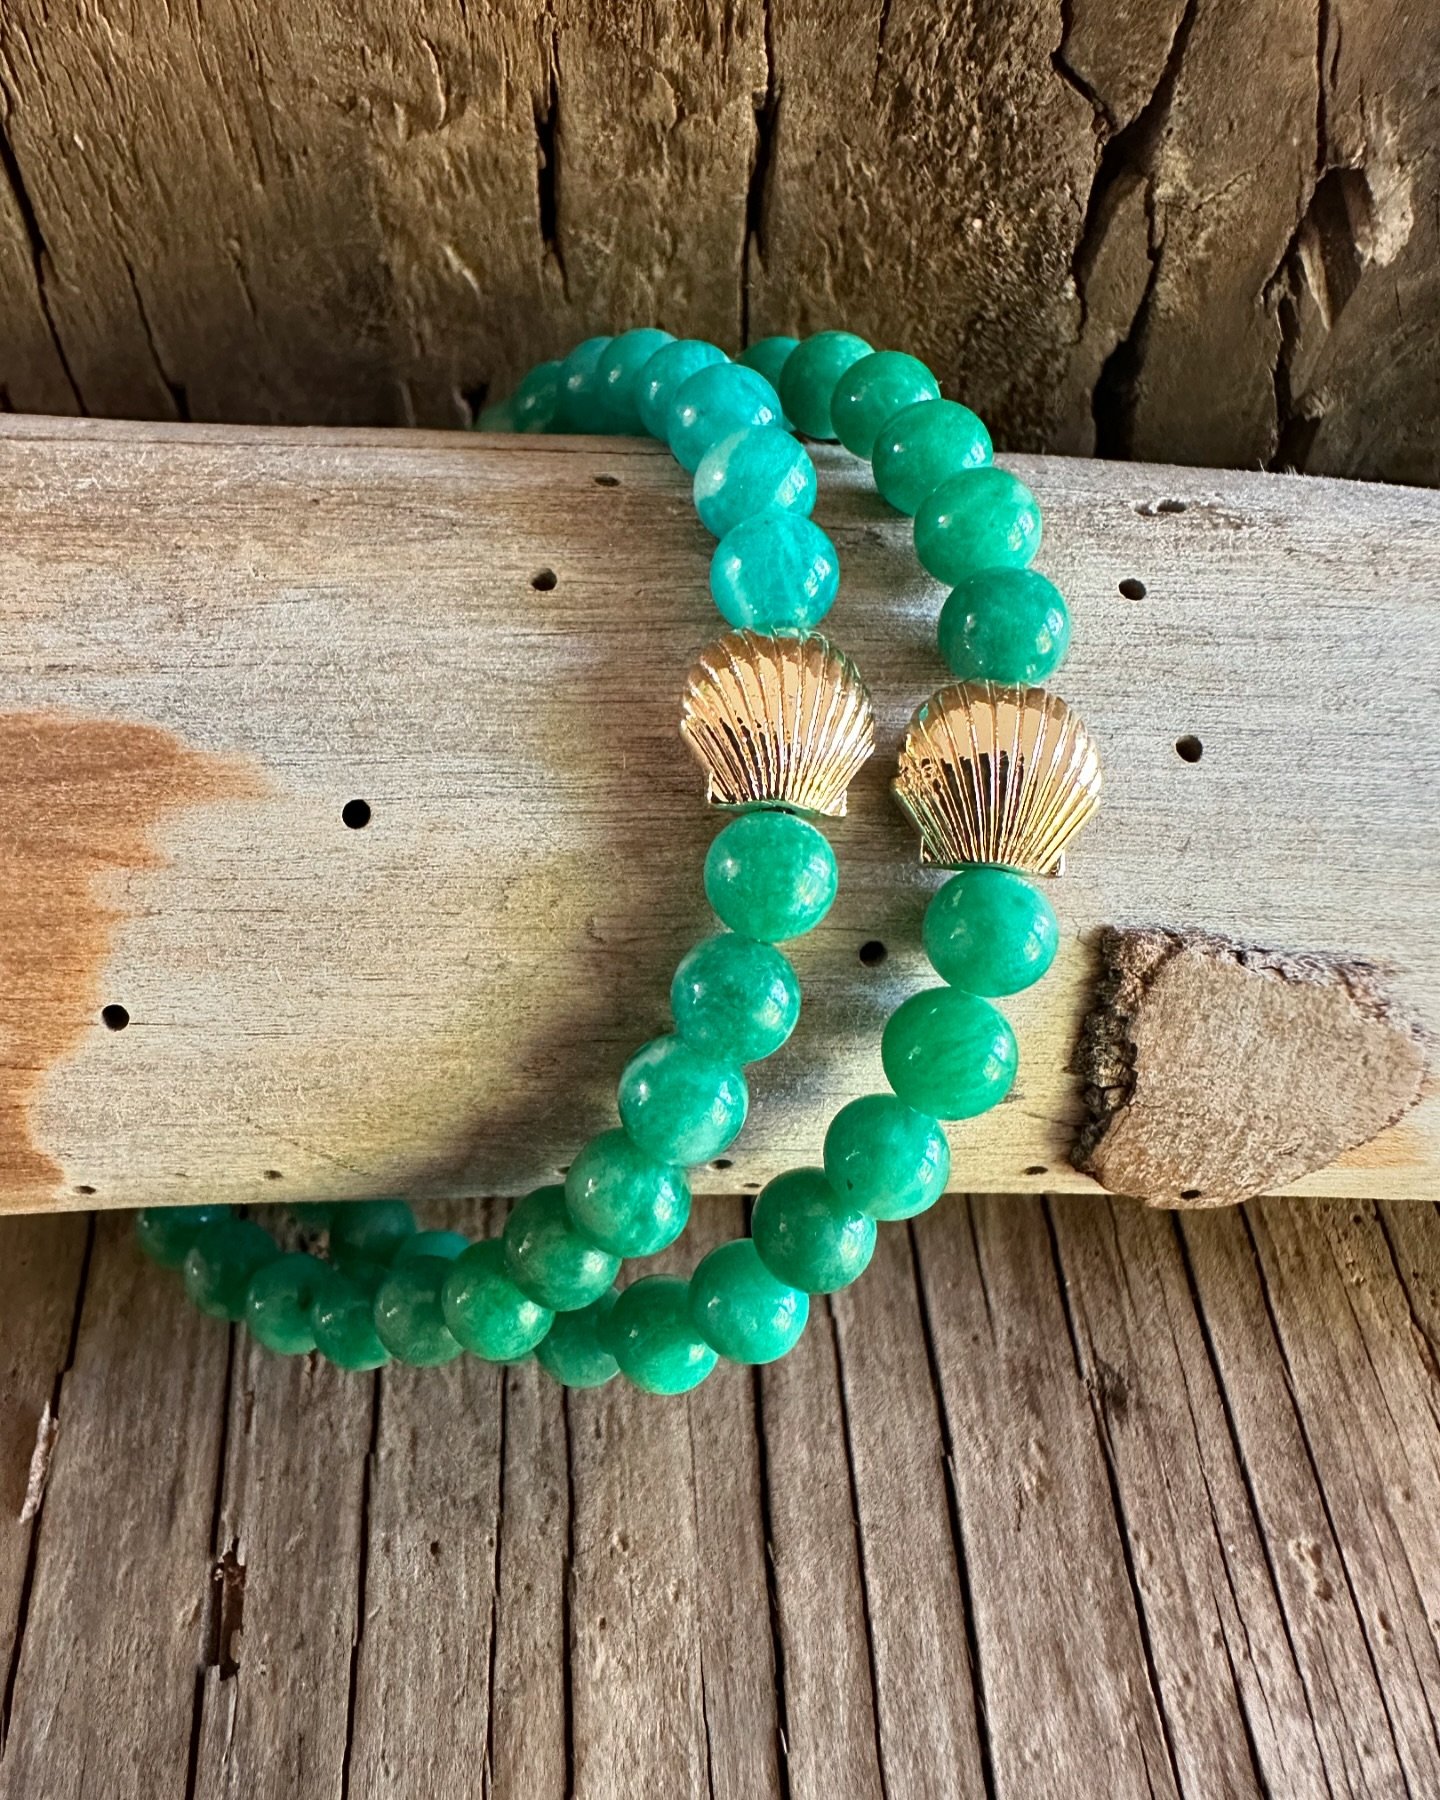 Sea Shell charm stretchy bracelets&hellip; this is just one option. There is so much more on 
www.Sirenahome.com so check it out.
&bull;
&bull;
&bull;
#shellcharmbracelet #stretchybracelets #handbeadedjewelry #smallbusiness #santabarbarajewelry #sant